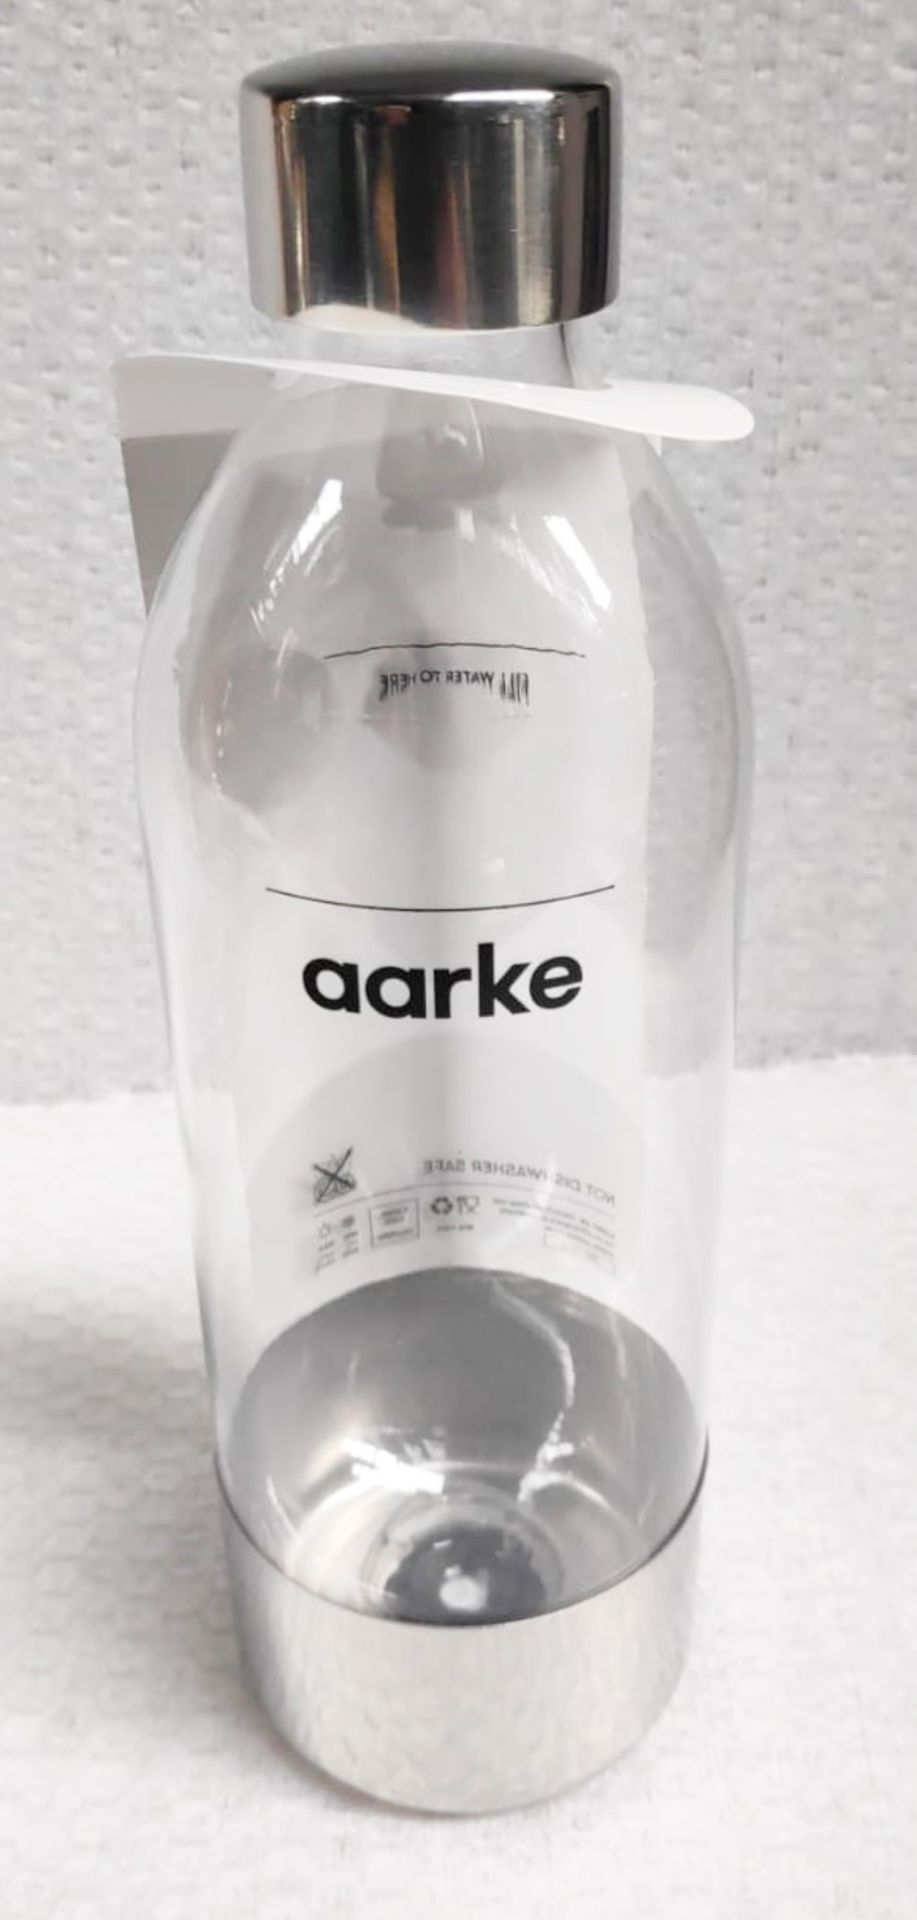 2 x AARKE Carbonated Water Bottles - Unused Boxed Stock - Ref: HAS2366/WH2/C25/04-23 - CL987 - - Image 2 of 3